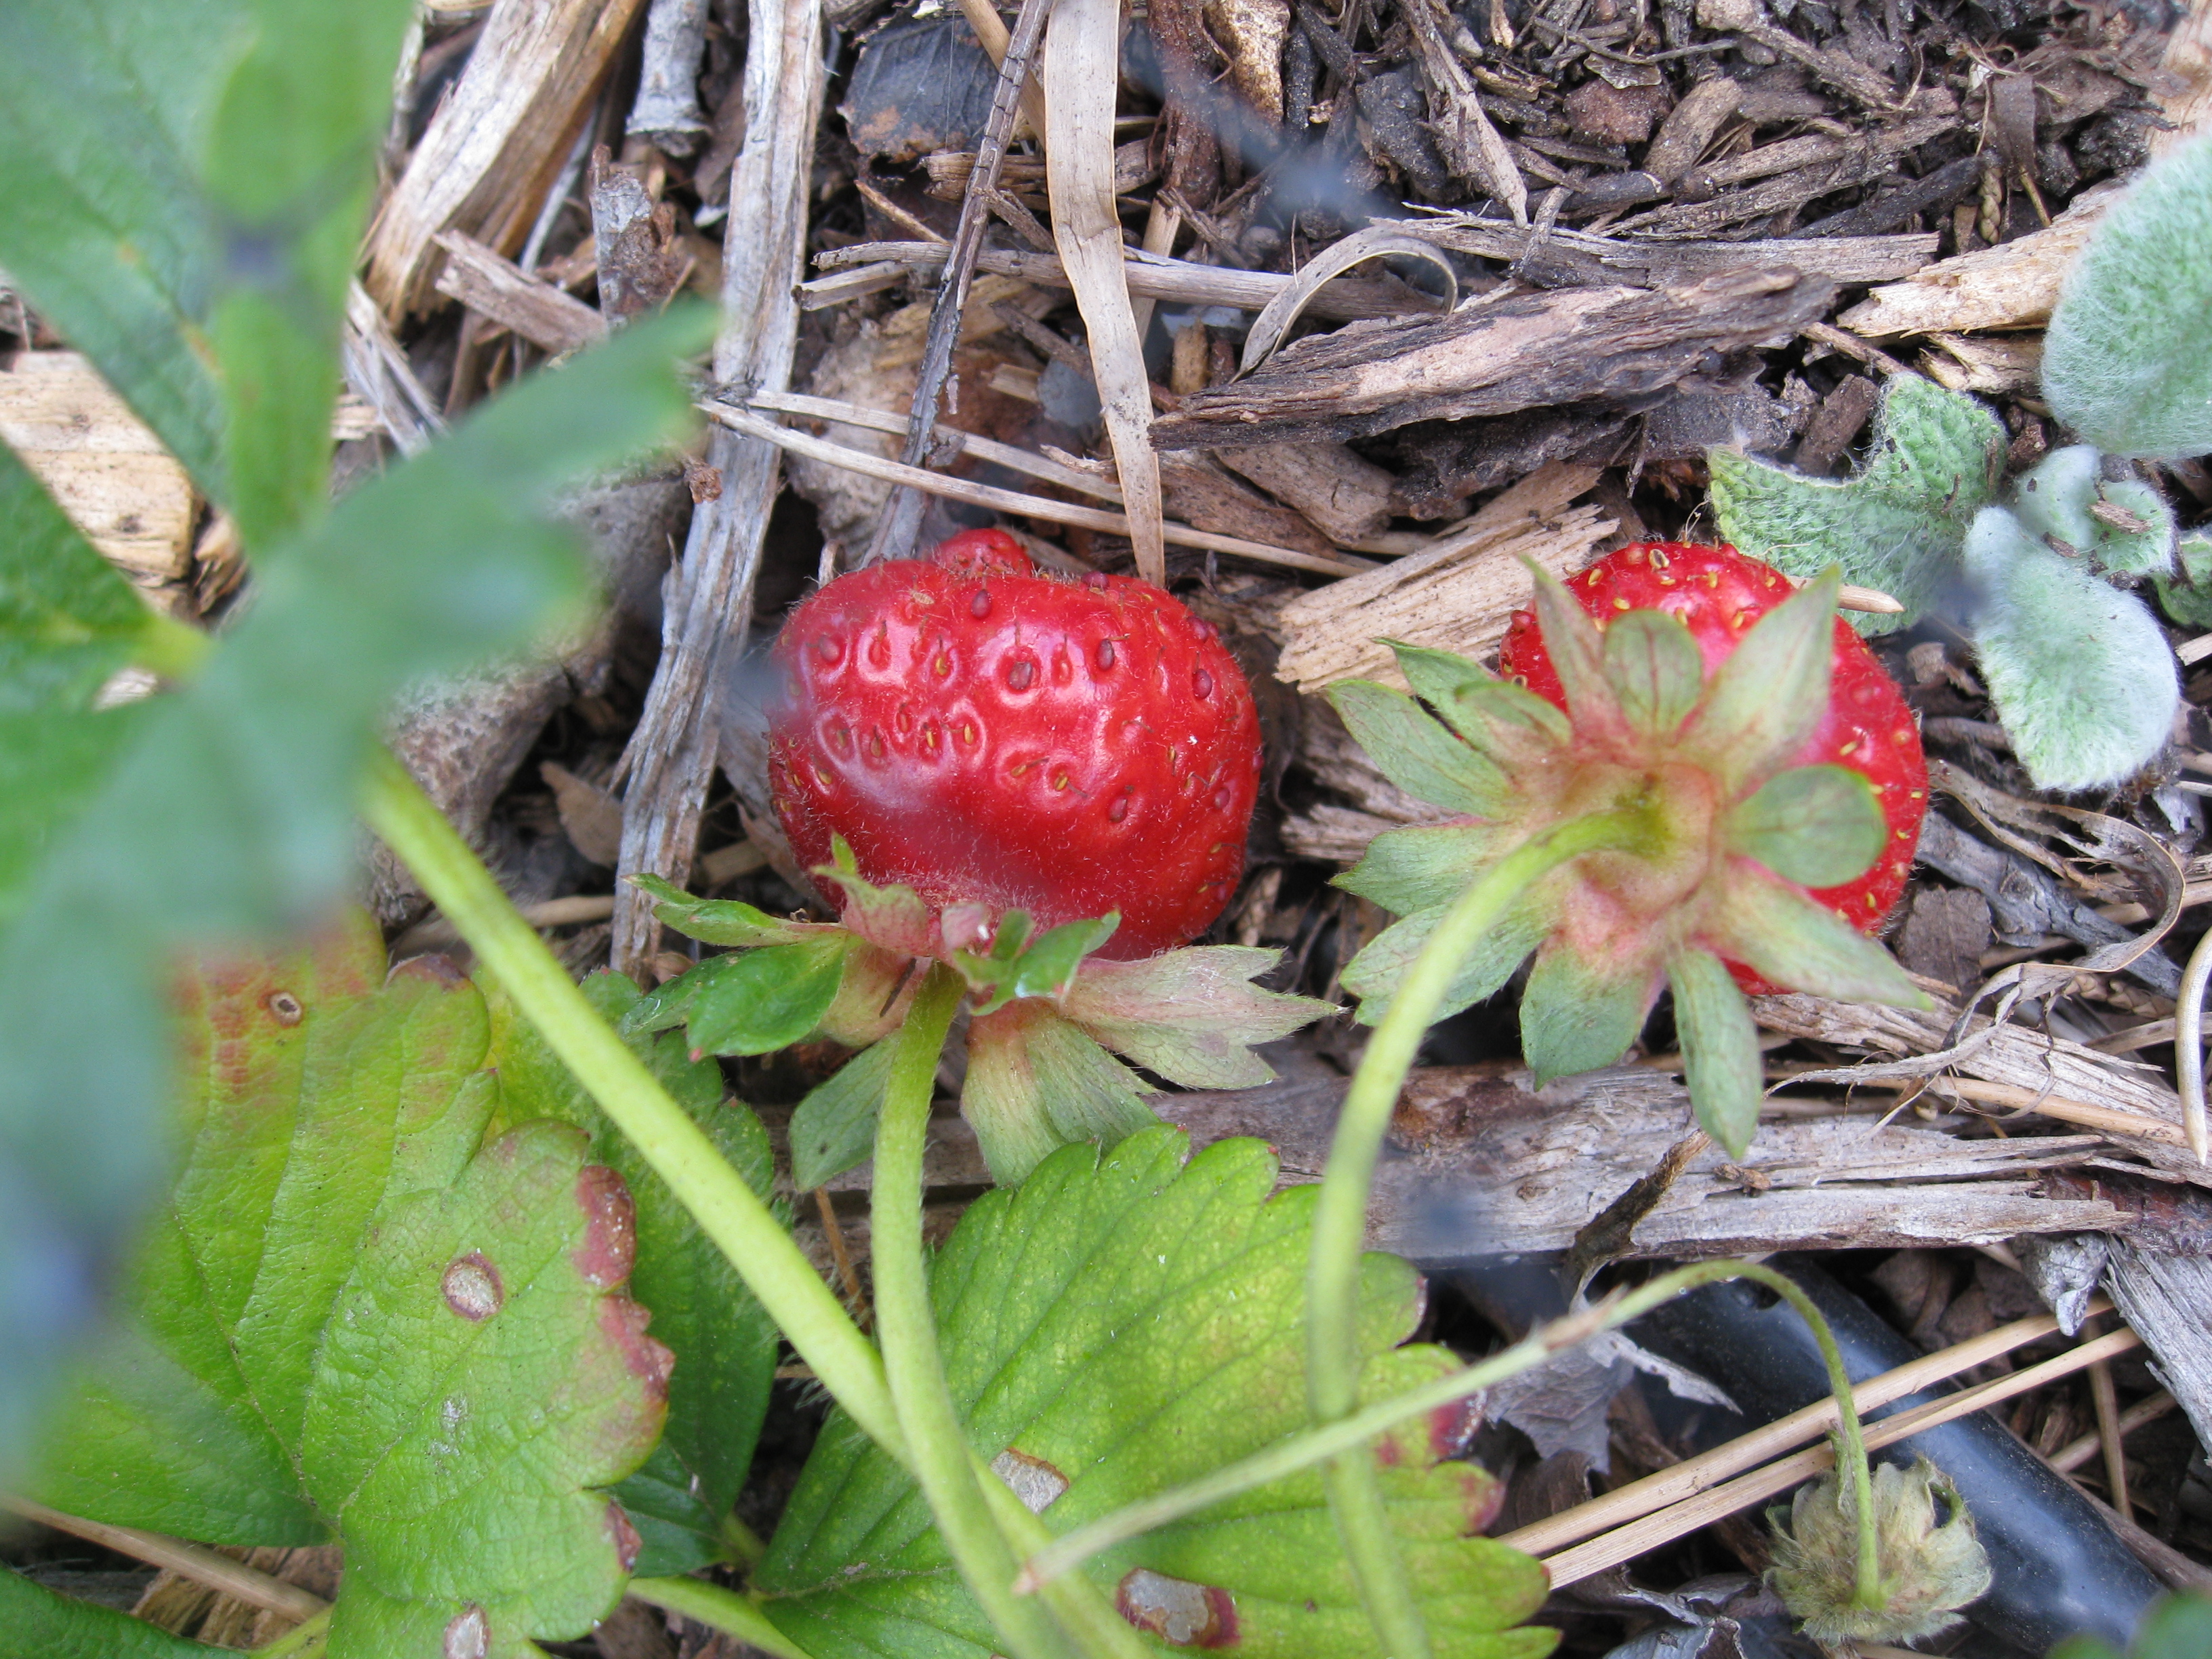 Strawberries are ripening every few days.